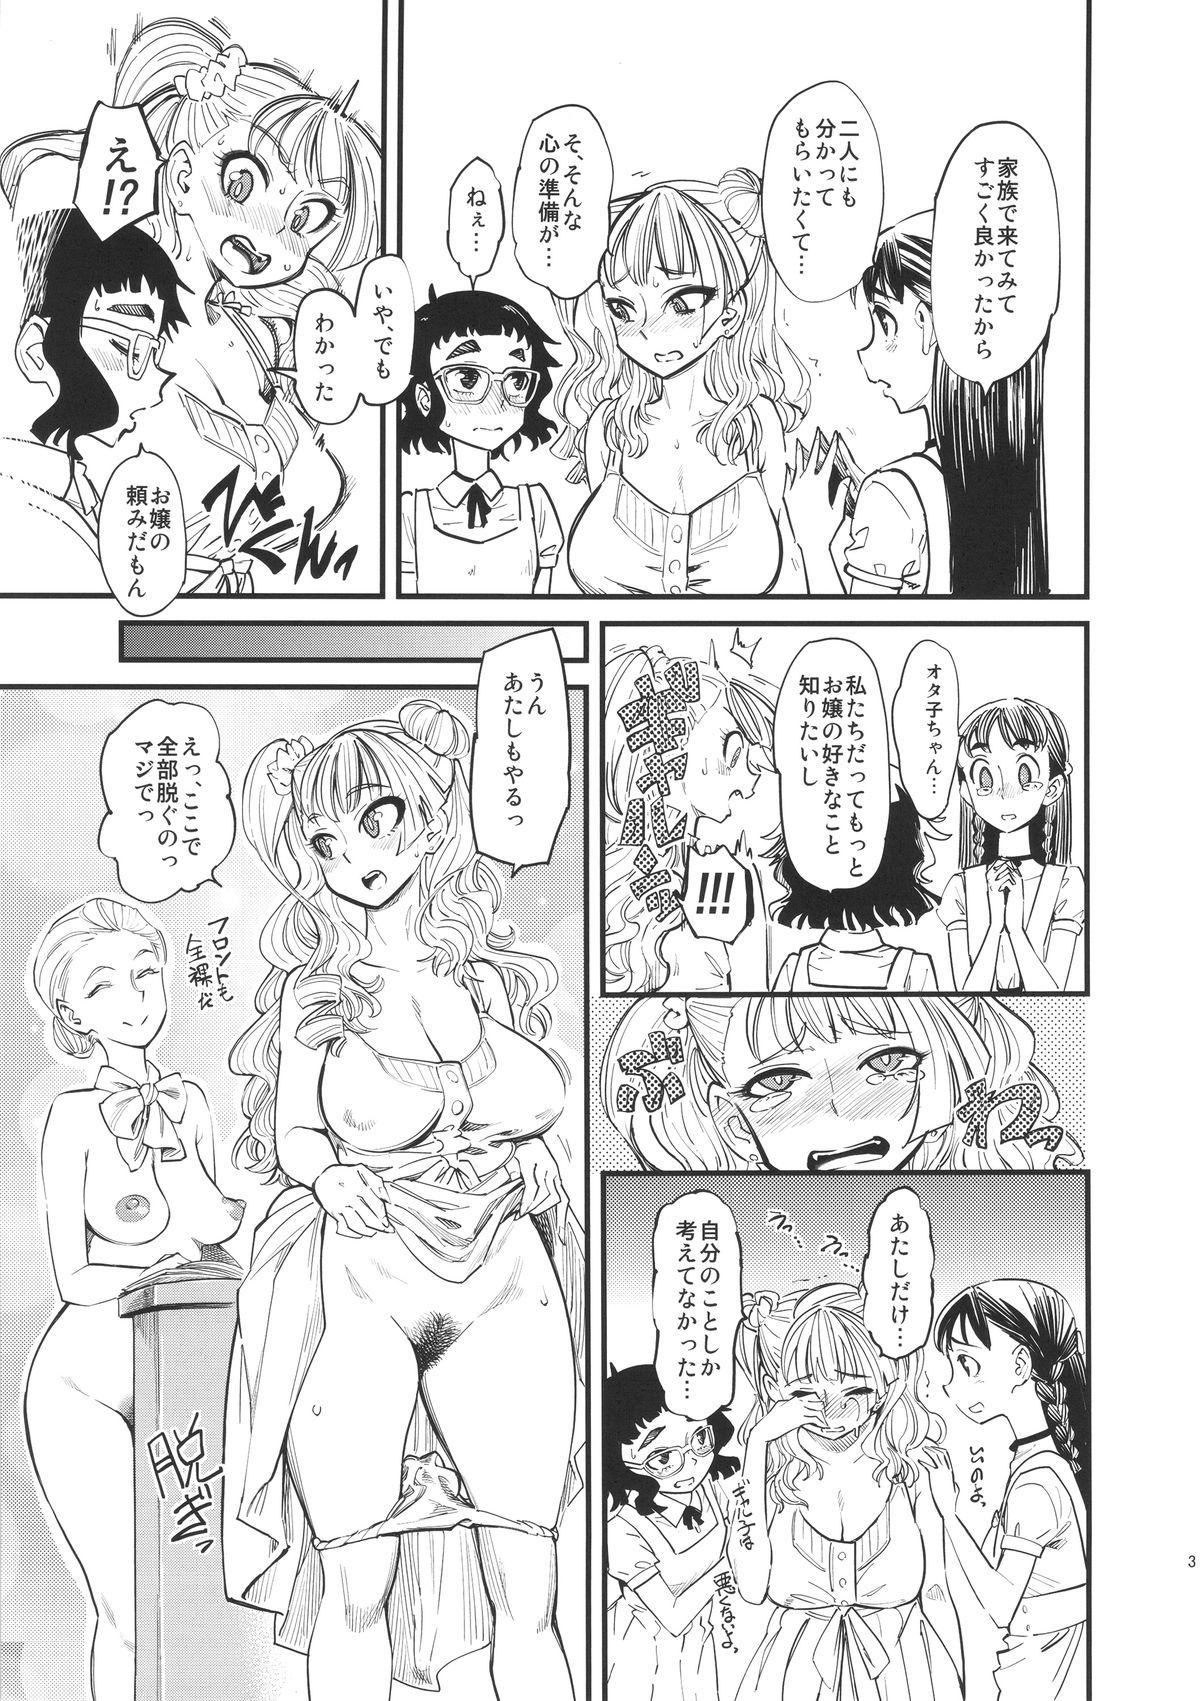 Reverse Cowgirl NMB - Oshiete galko chan Gay Outdoor - Page 4